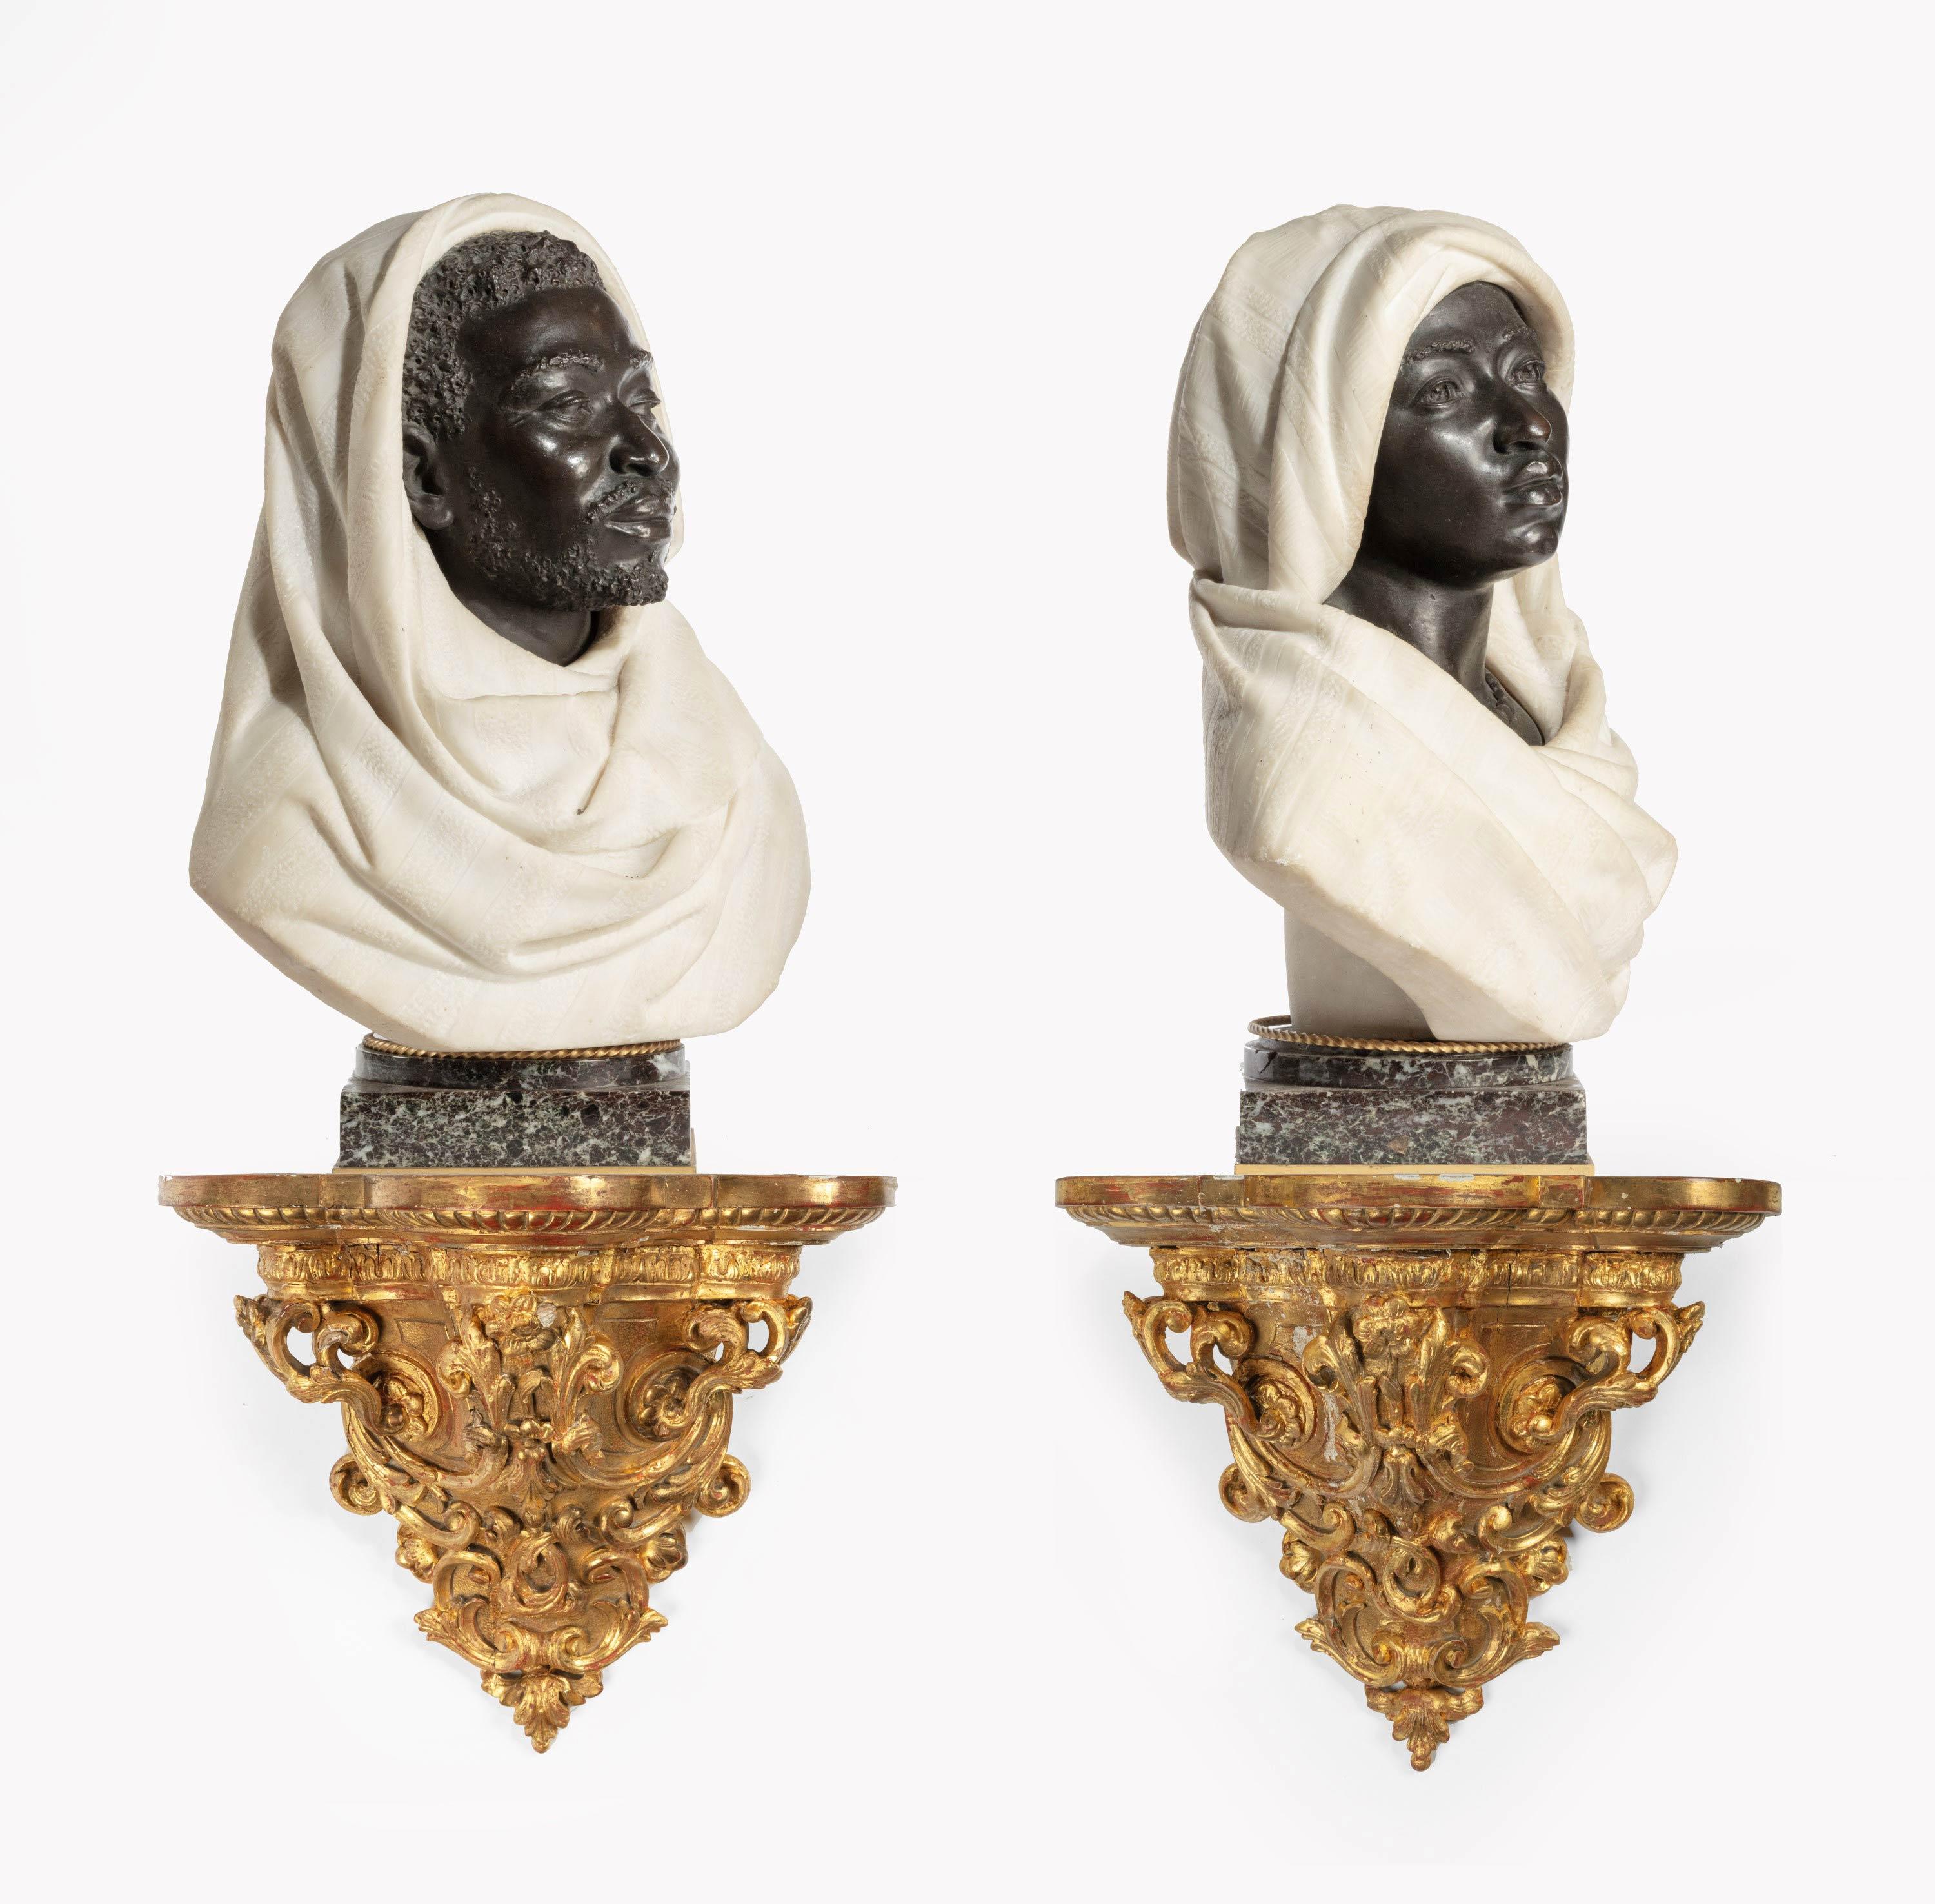 Marble Pair of Late 19th Century Nubian Figures by Caccia and Dasson For Sale